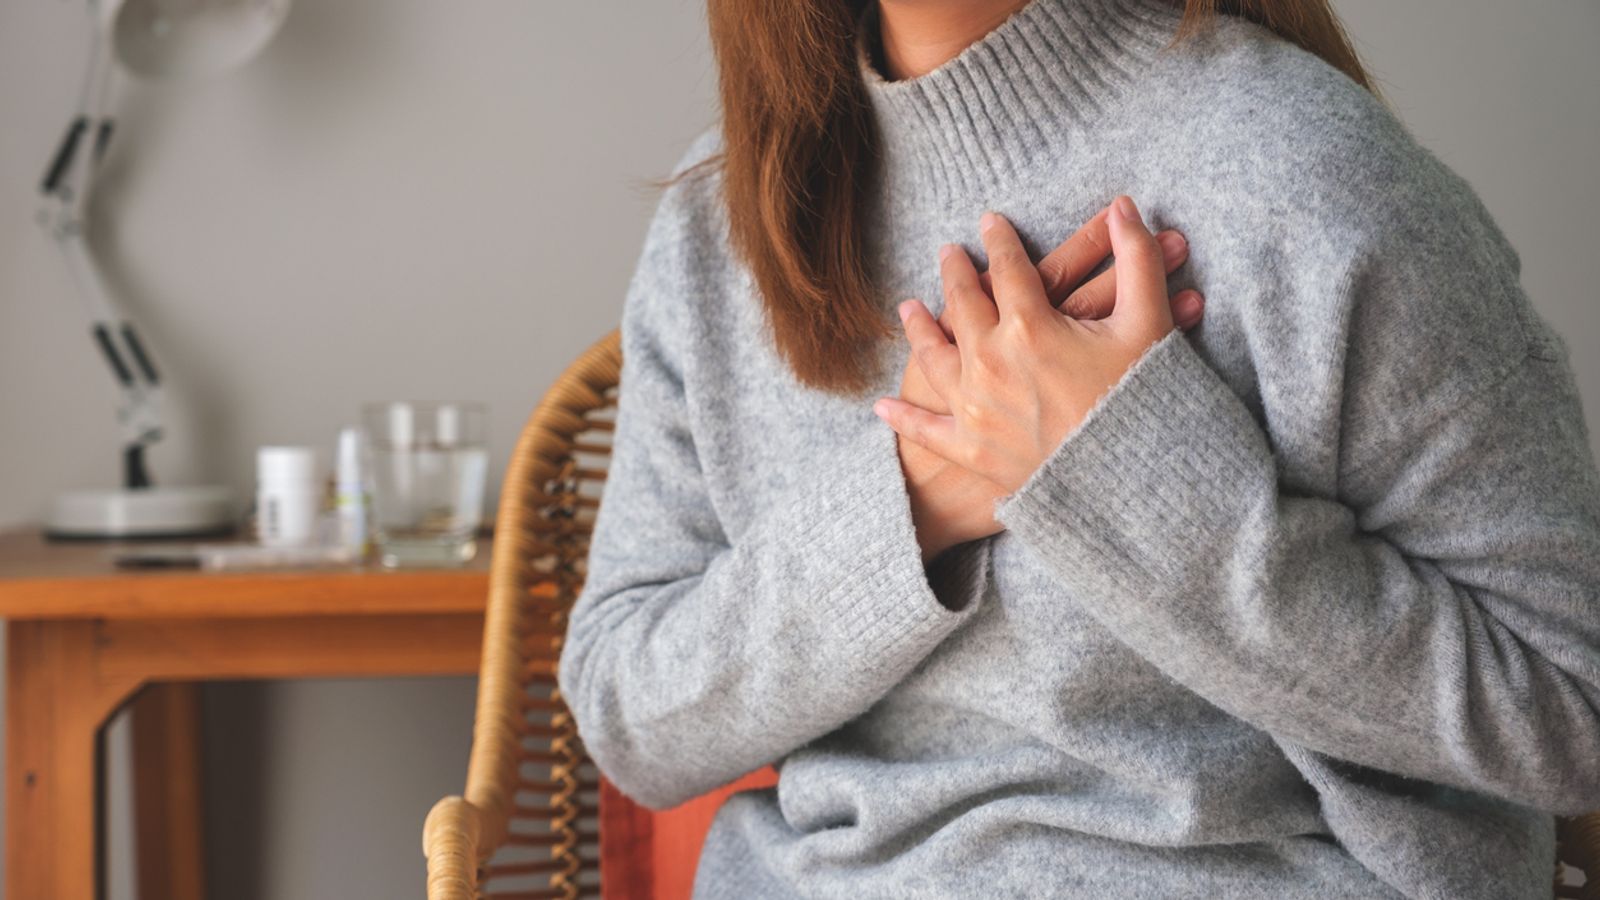 These are the common signs of a heart attack which are often ignored - do you know them?